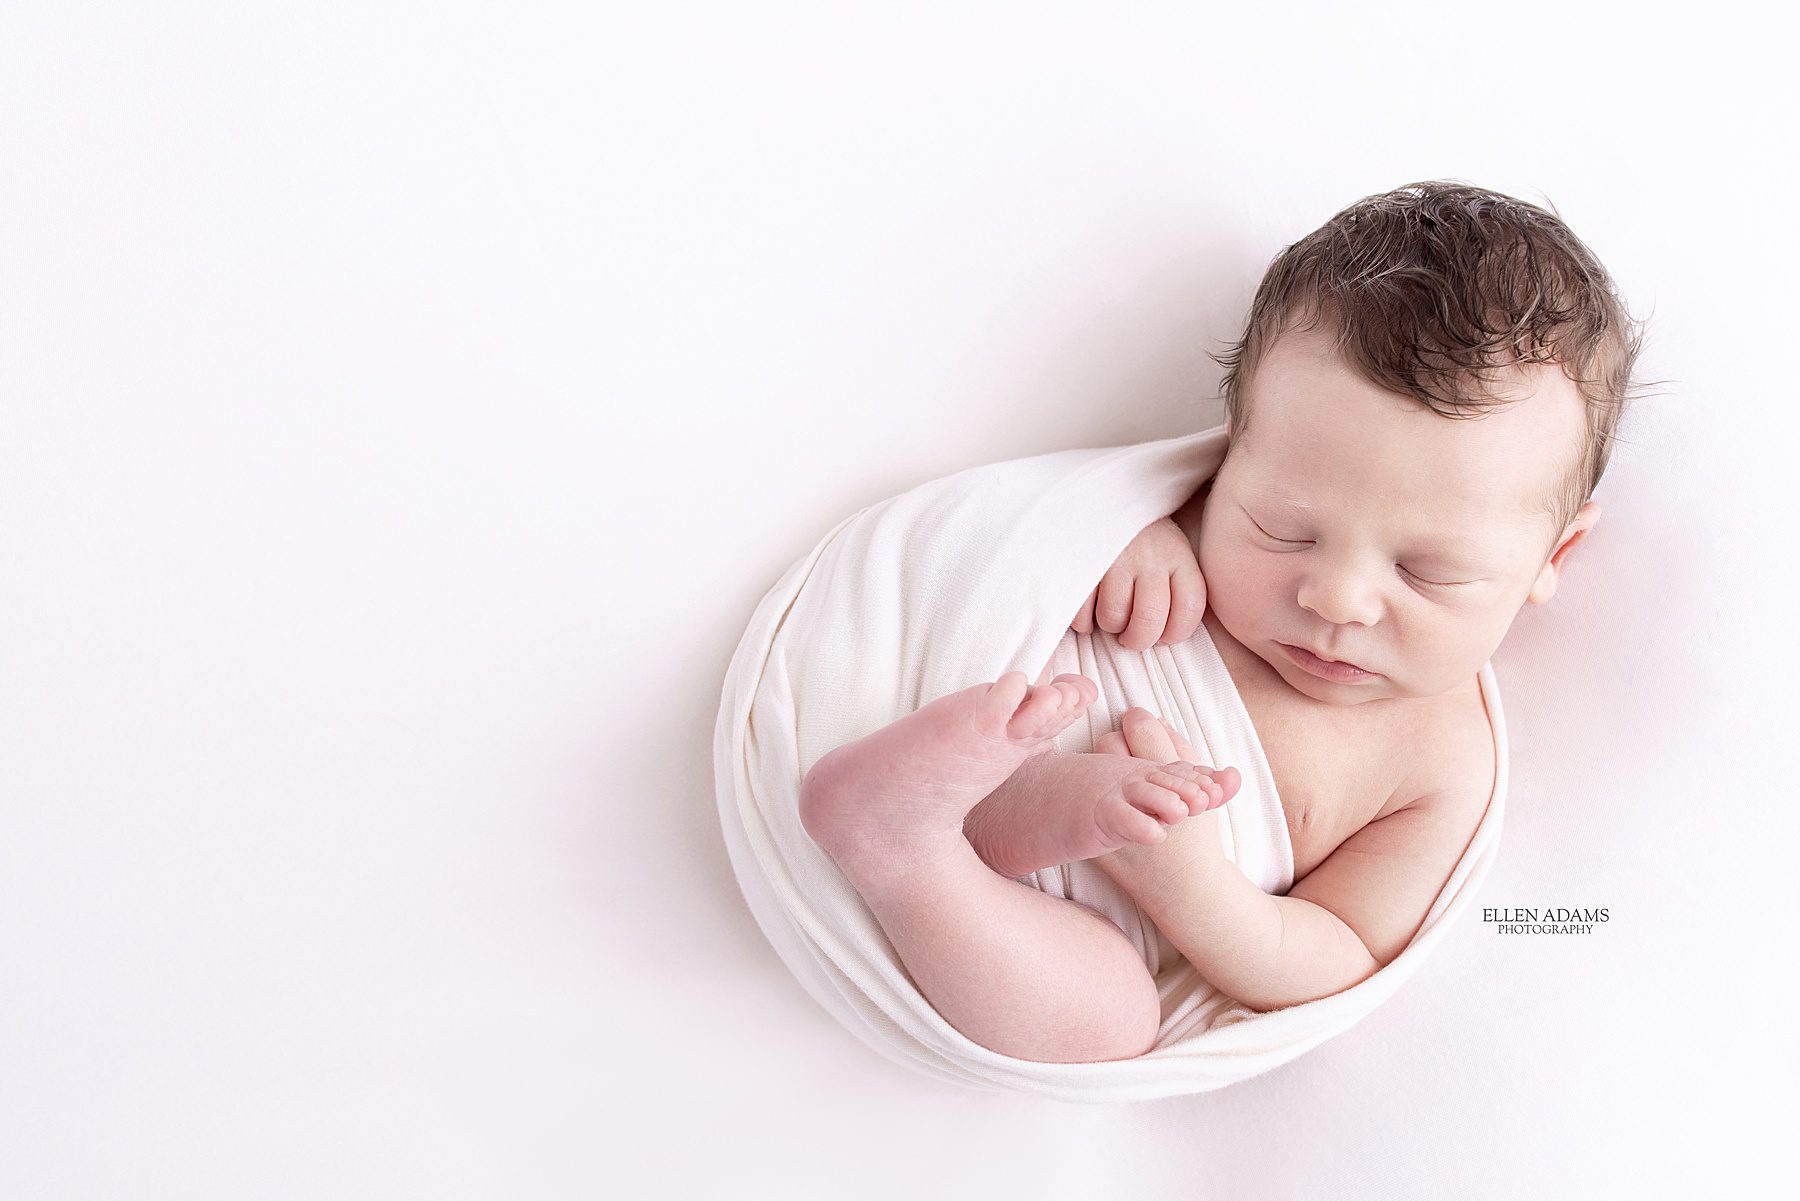 Who is the best newborn photographer near me